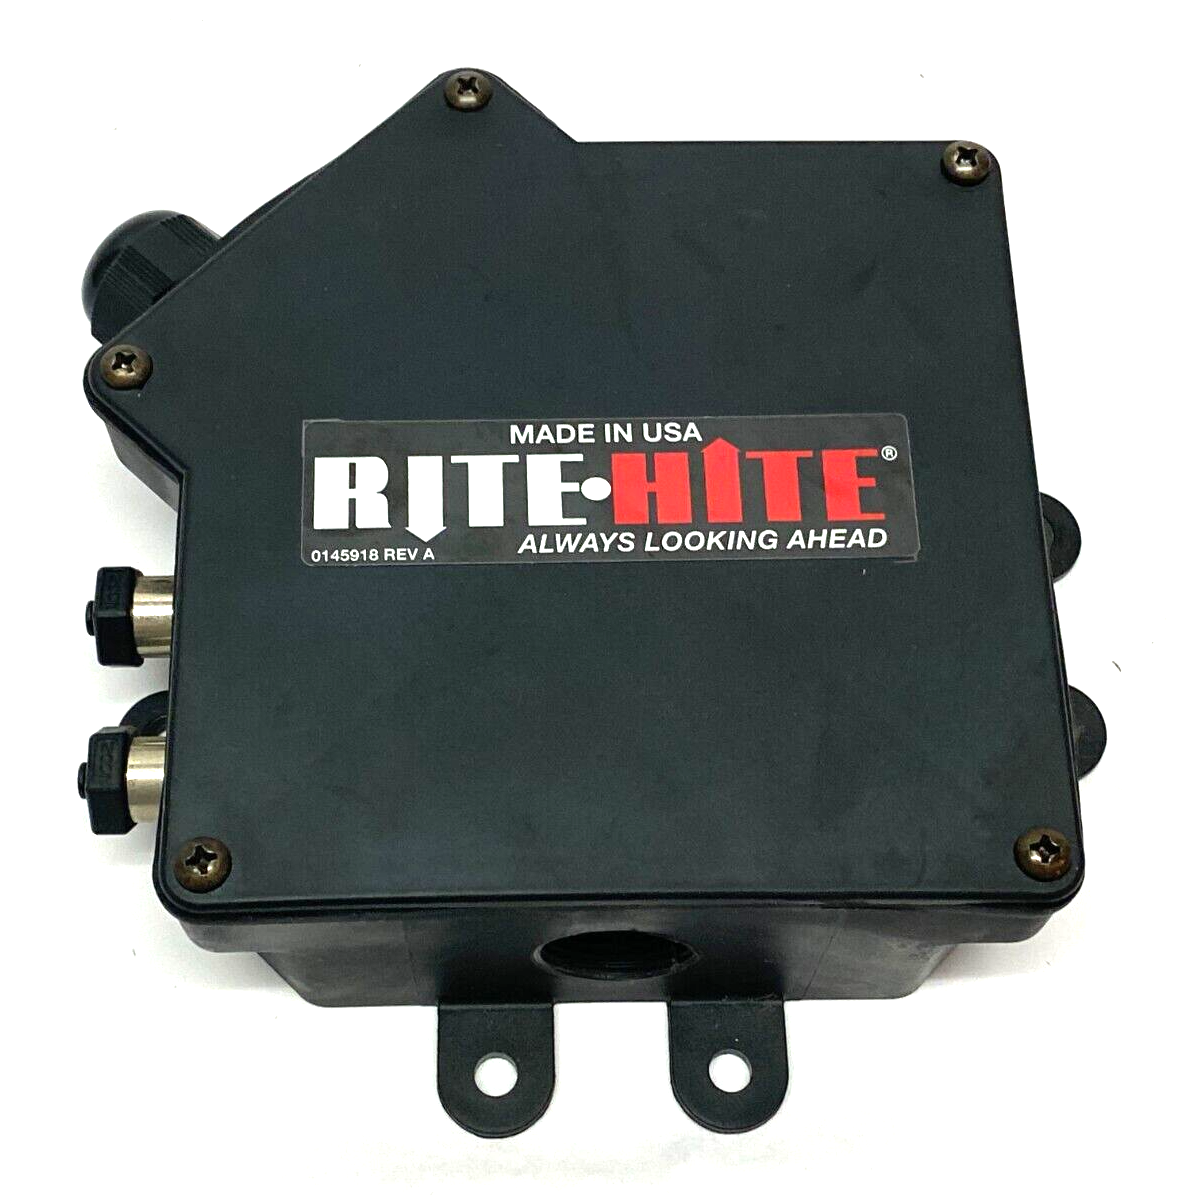 Rite Hite ISE11 Rev A Left Side Control Module Enclosure Wall Mounted 0145918